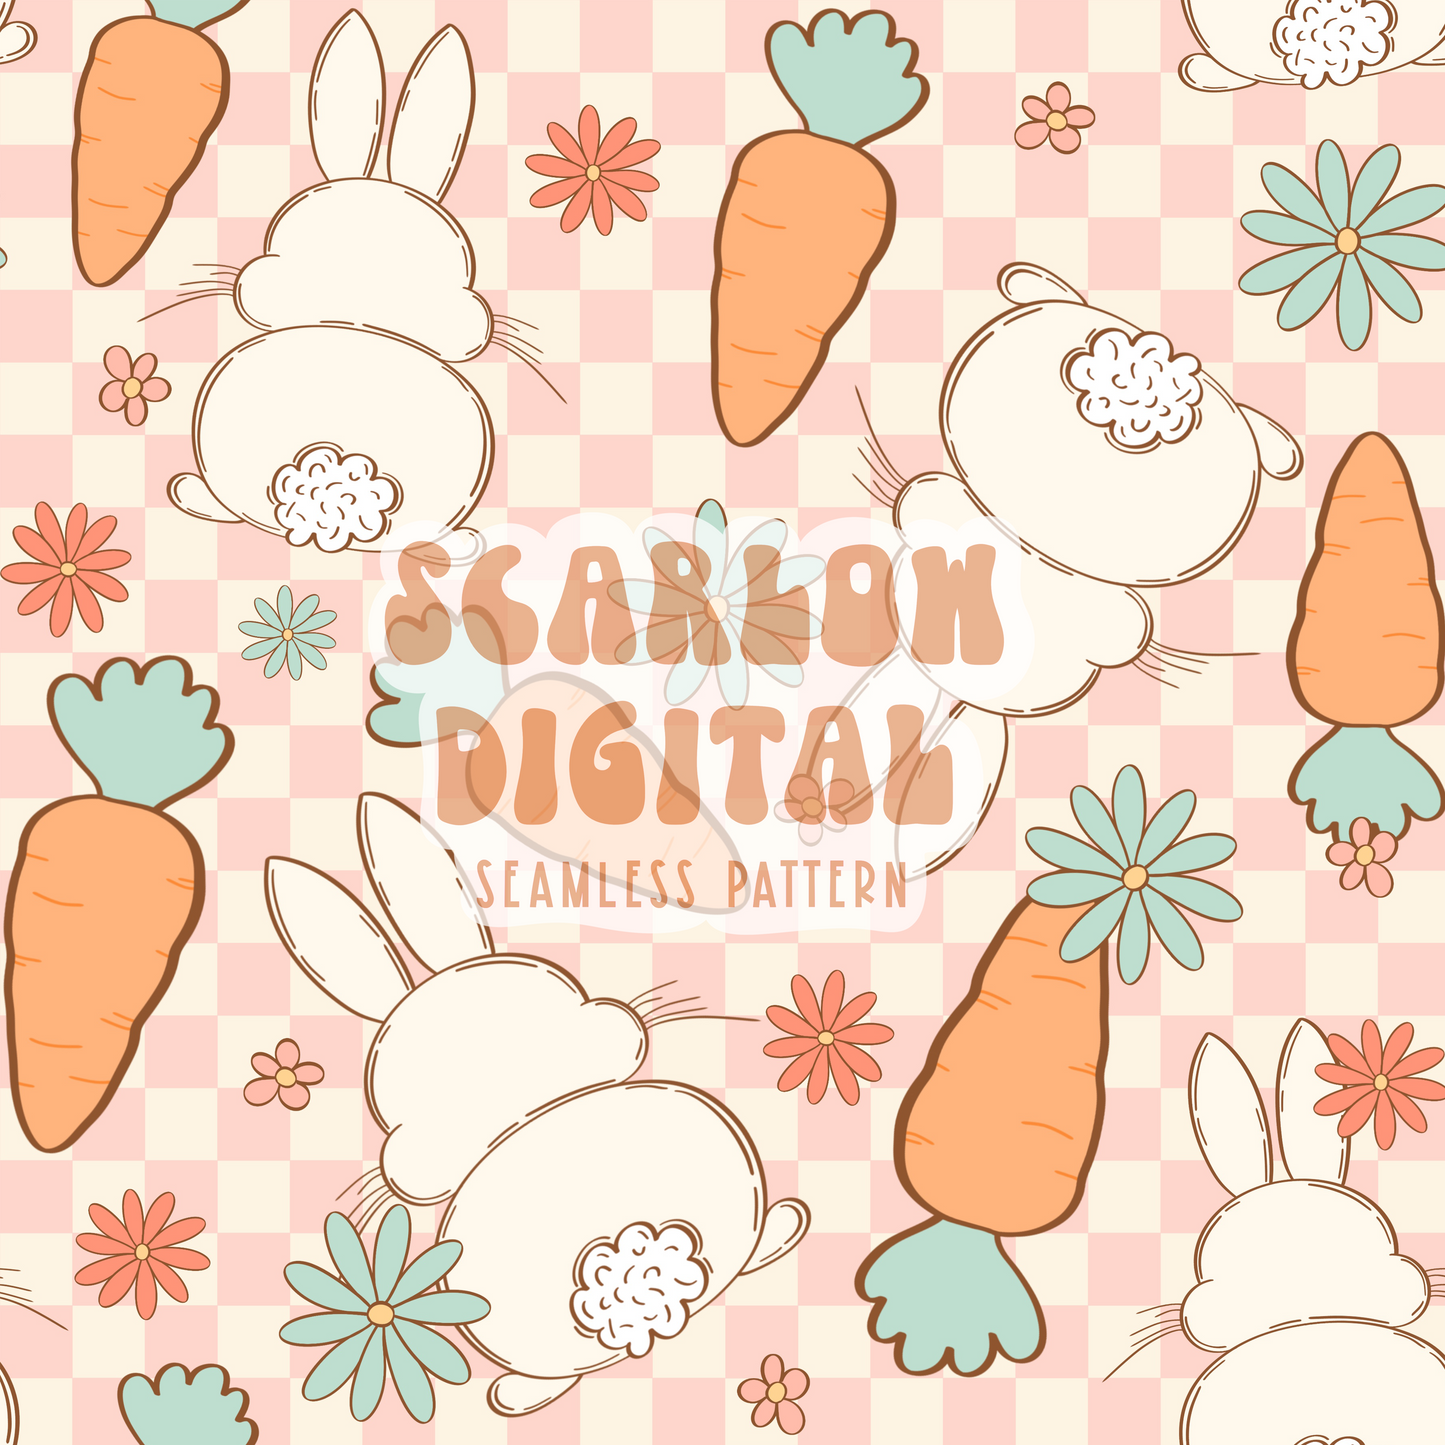 Bunny and Carrots Seamless Pattern-Easter Sublimation Digital Design Download-girl easter seamless file, floral sublimation, bunny babe jpg